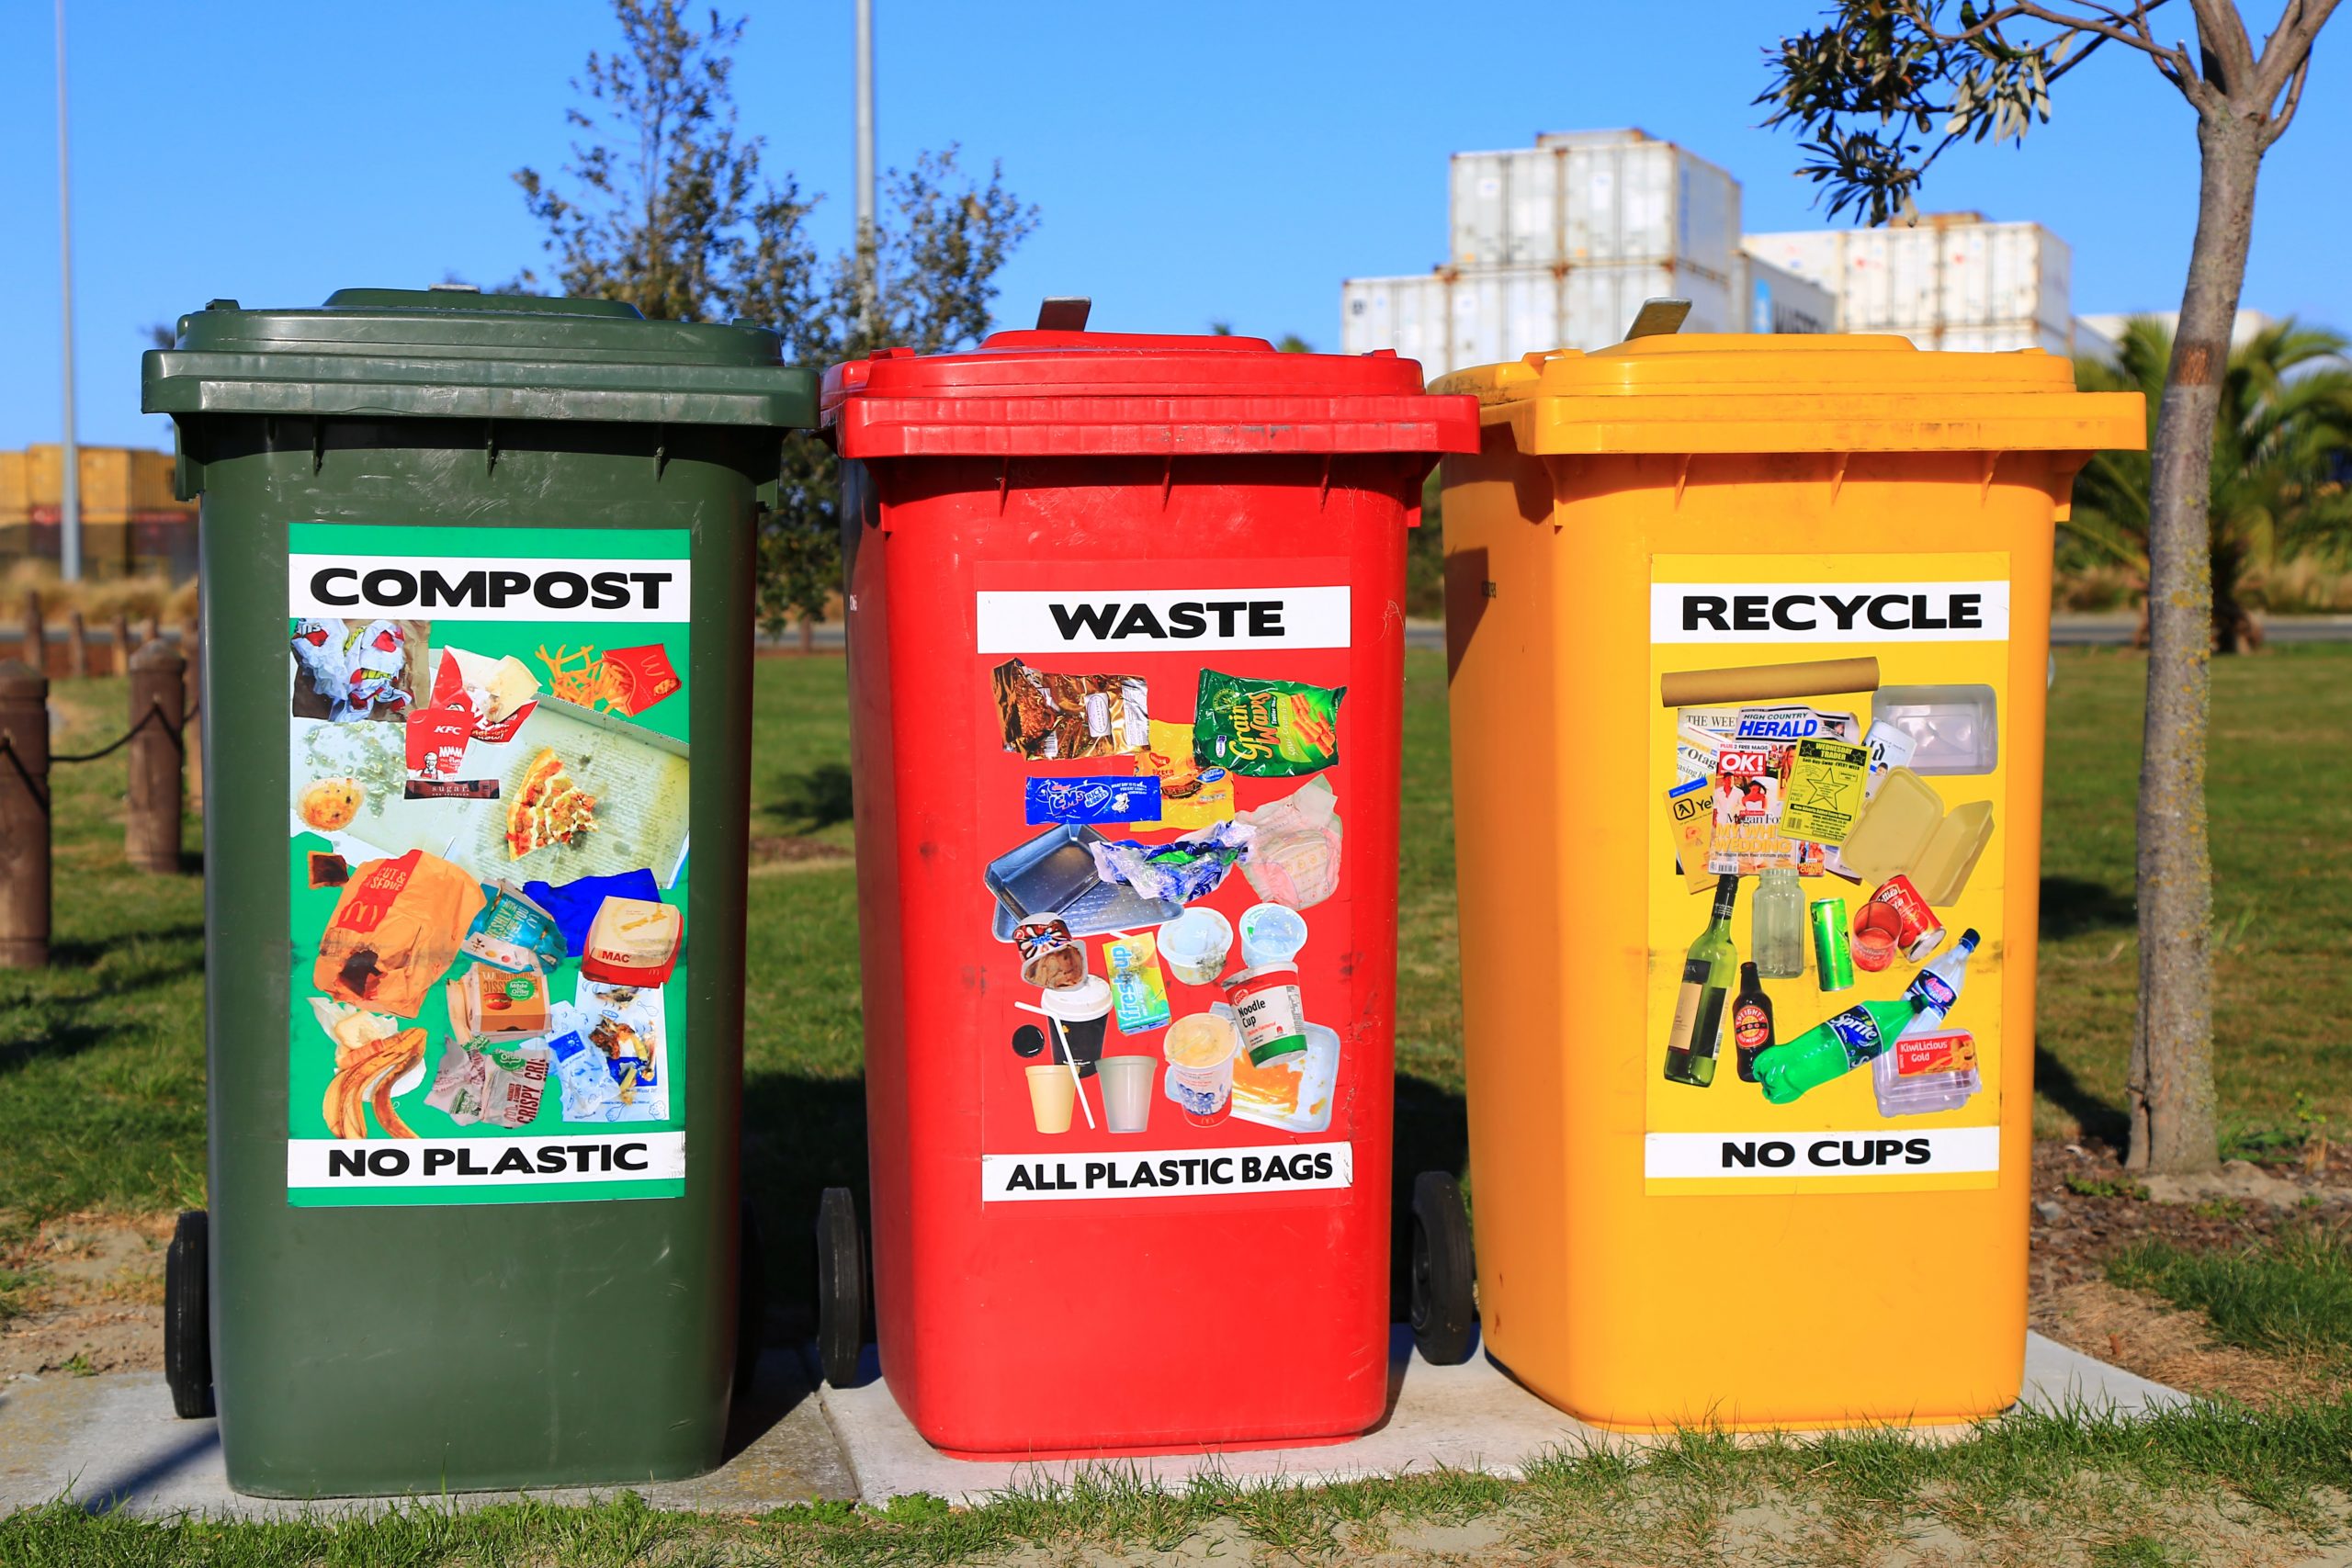 Wheelie bins for recycling and rubbish